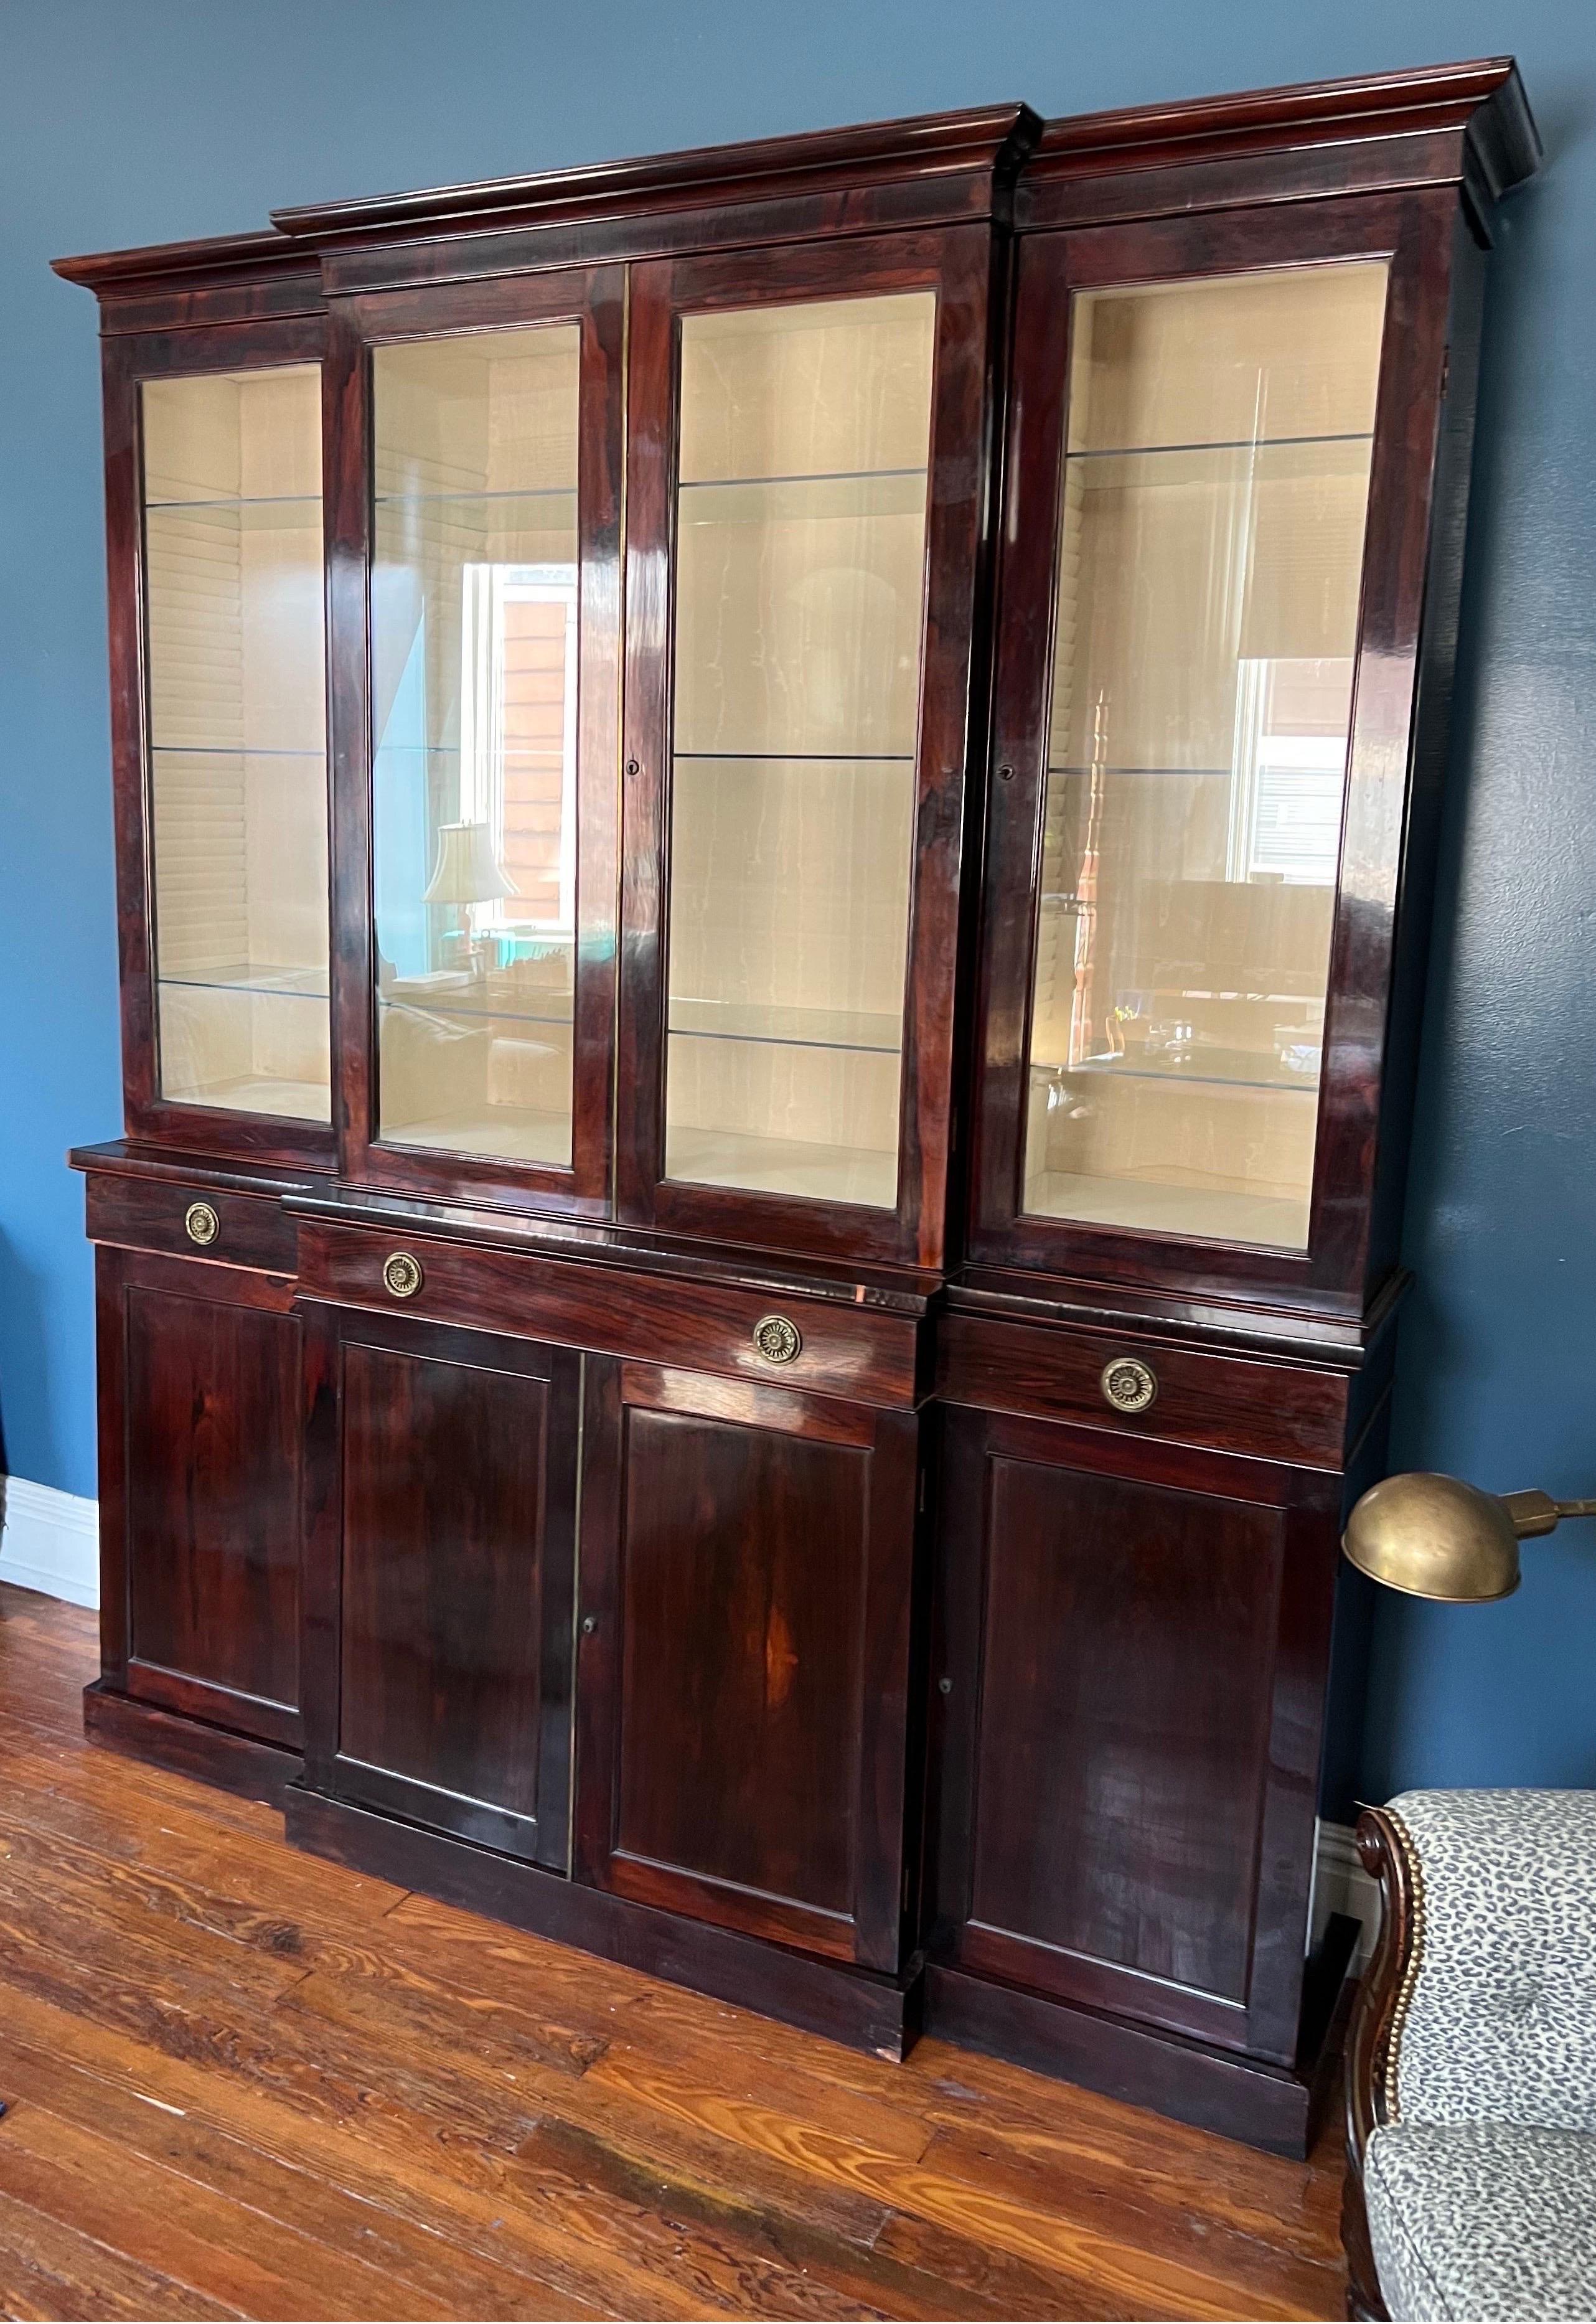 Fine 19th century English regency period Rosewood breakfront bookcase. “Plain and neat” but refined with details such as row of horizontal shelves hidden by the bottom rail of the glazed doors on top, finely casted pulls and brass molding down the